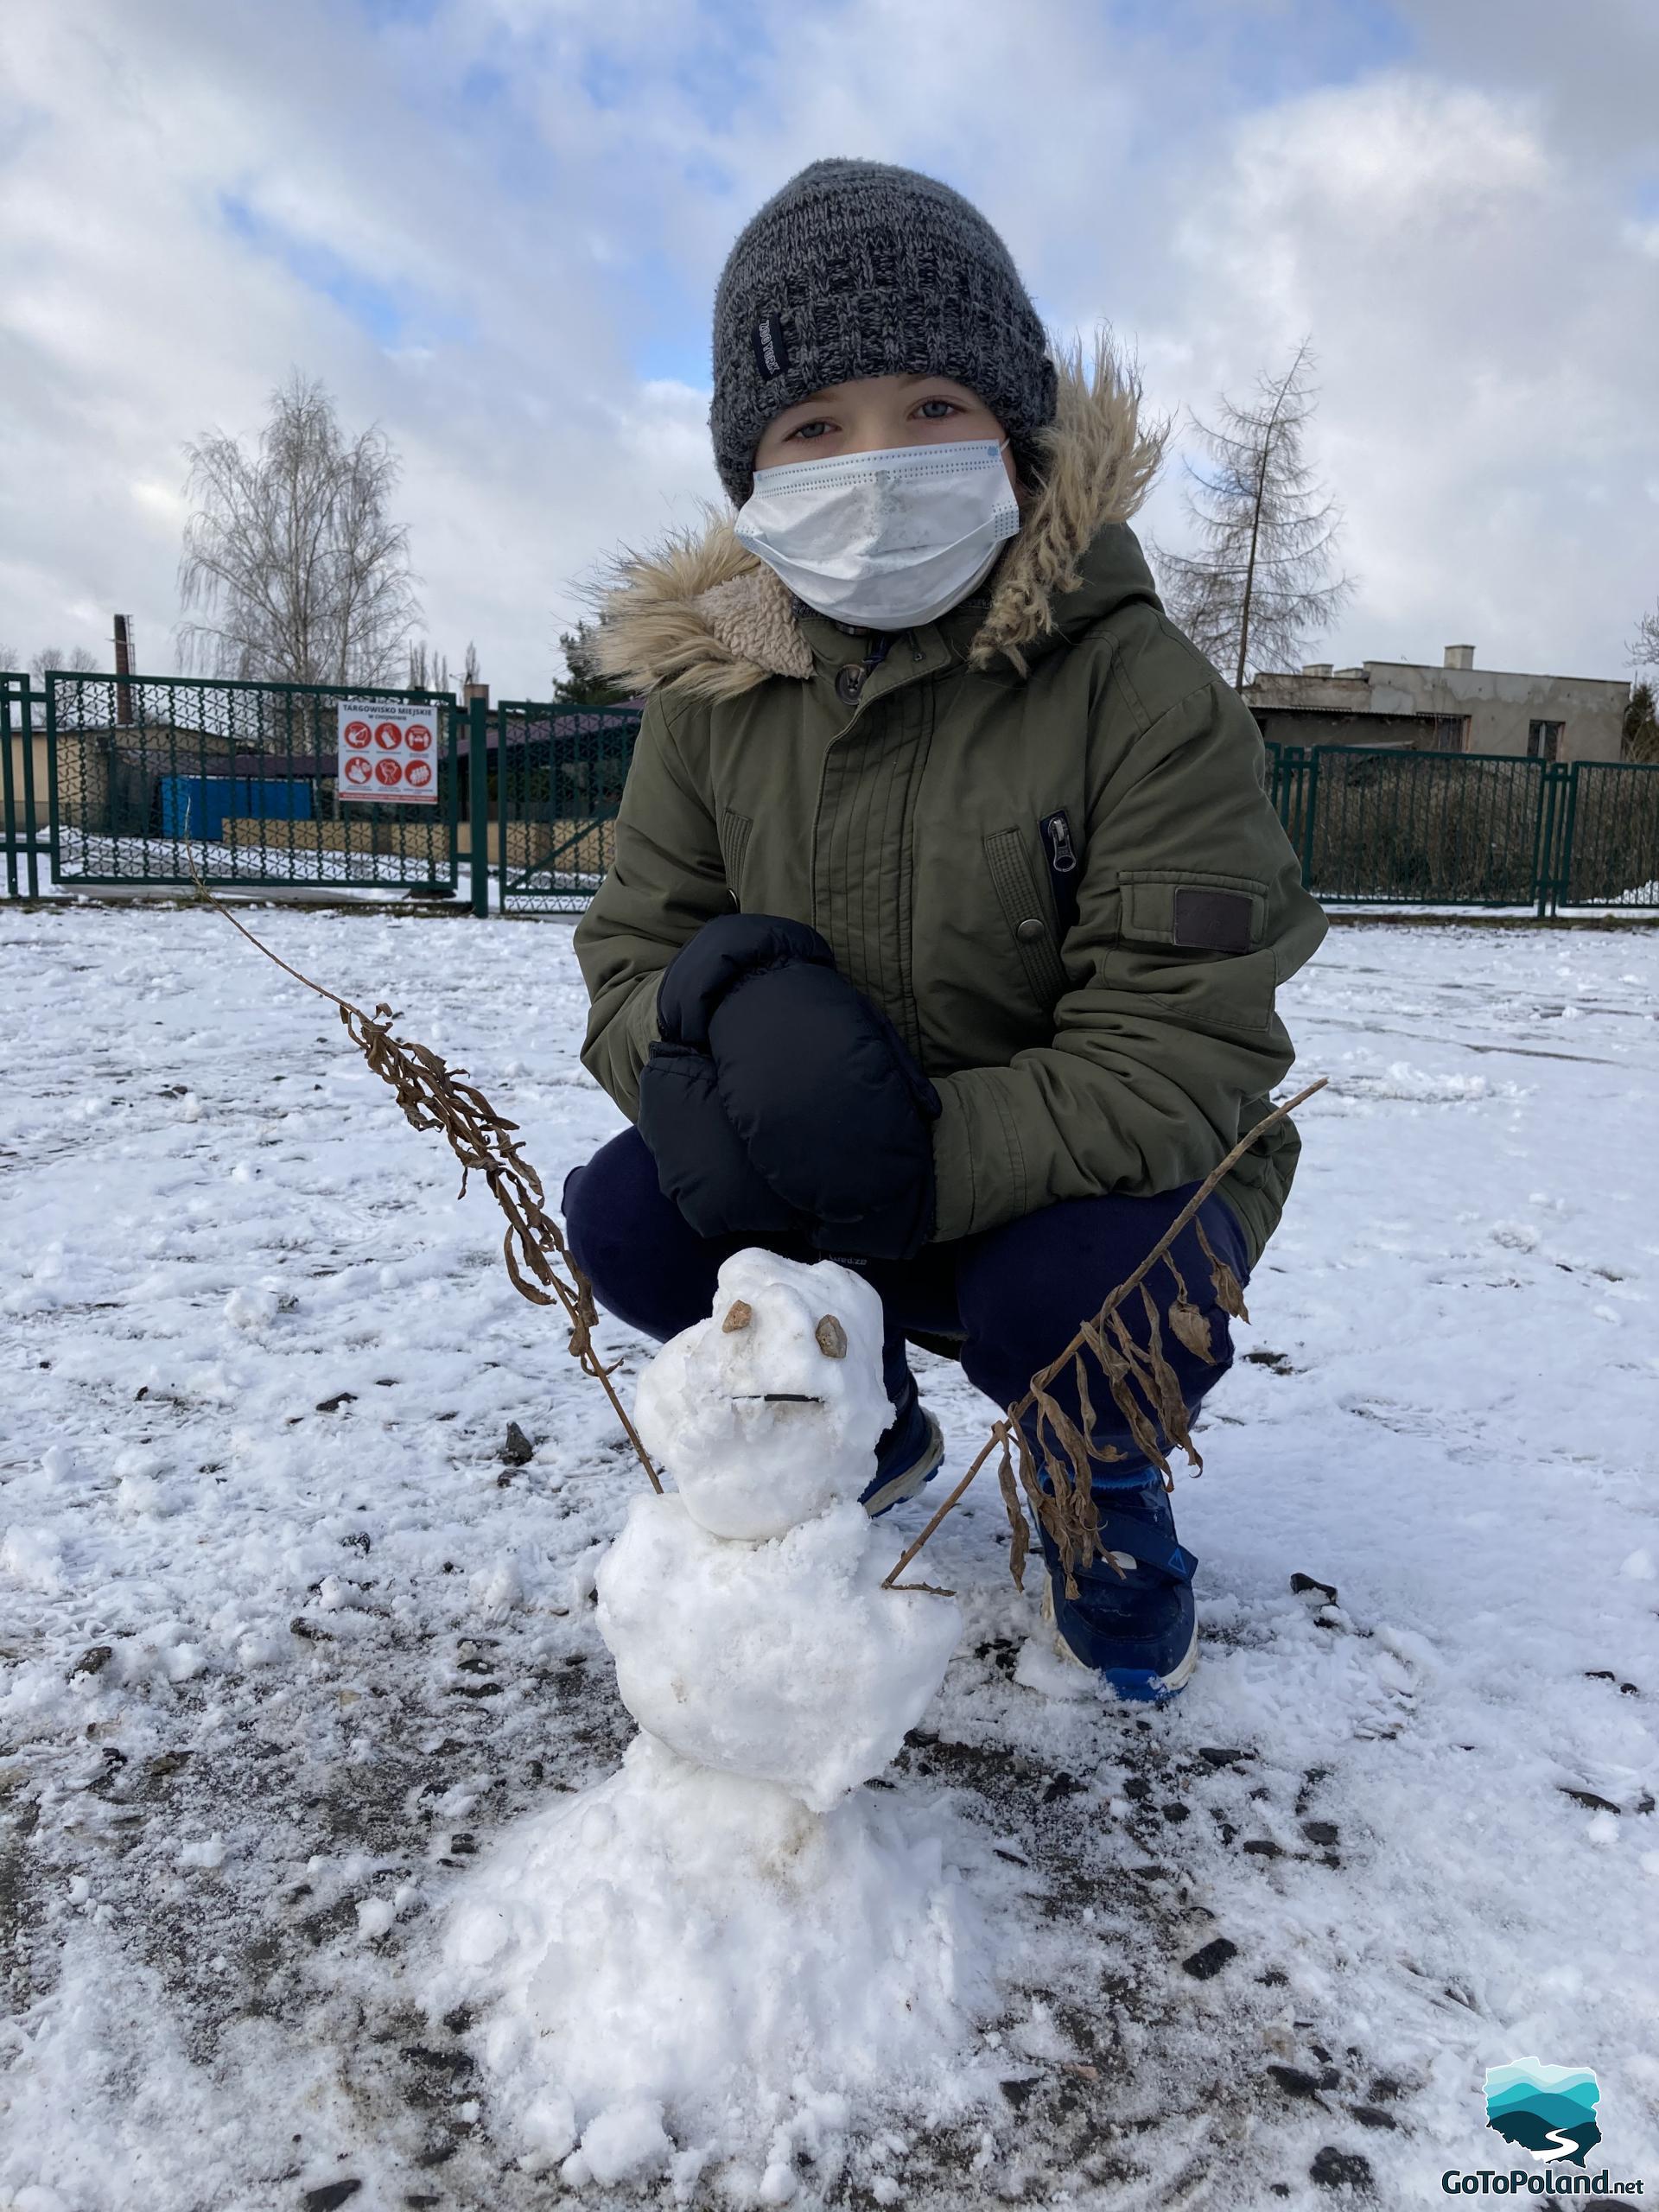 A young boy with a small snowman he made